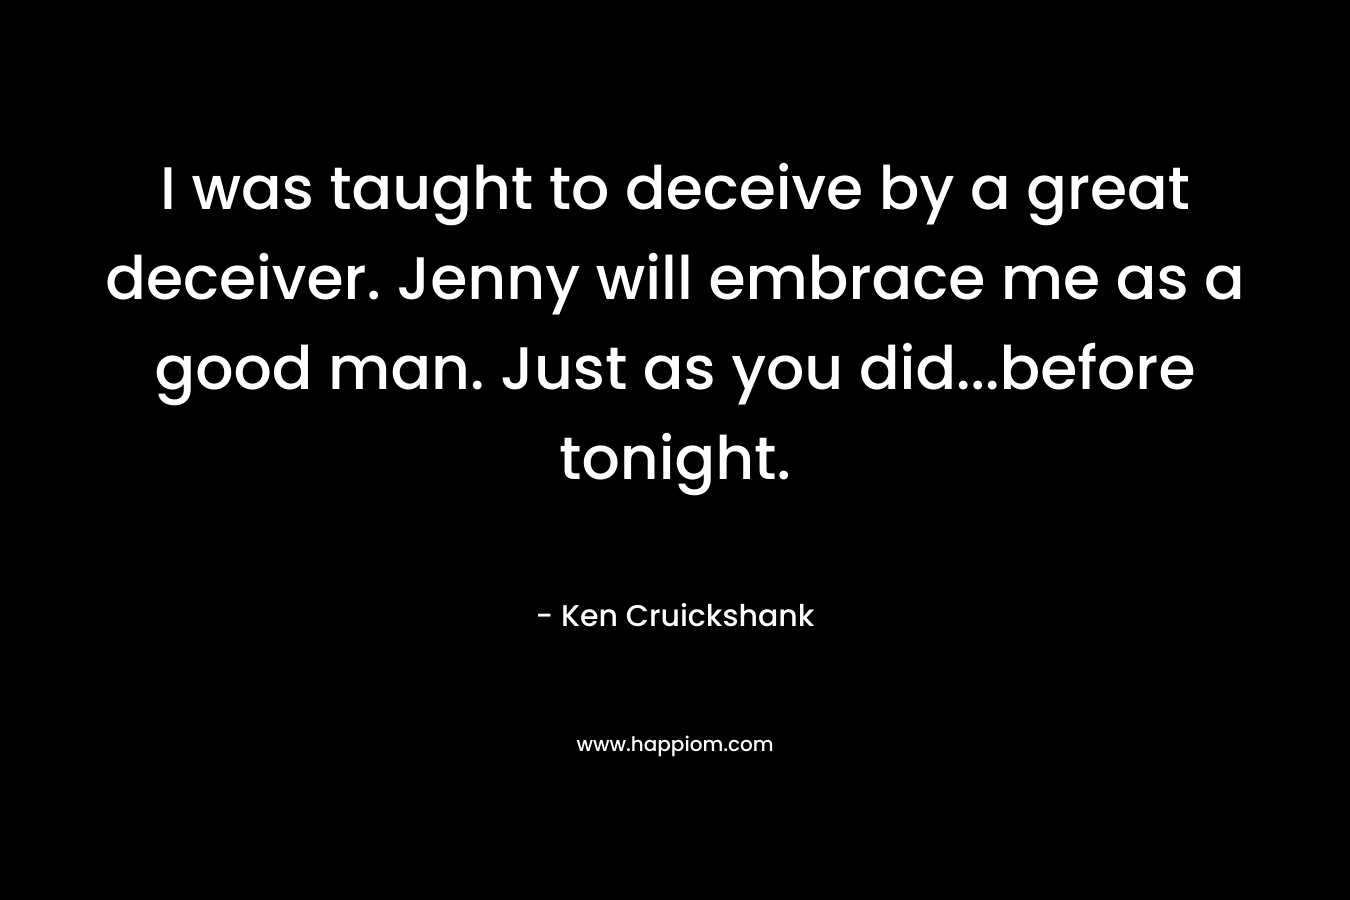 I was taught to deceive by a great deceiver. Jenny will embrace me as a good man. Just as you did…before tonight. – Ken Cruickshank